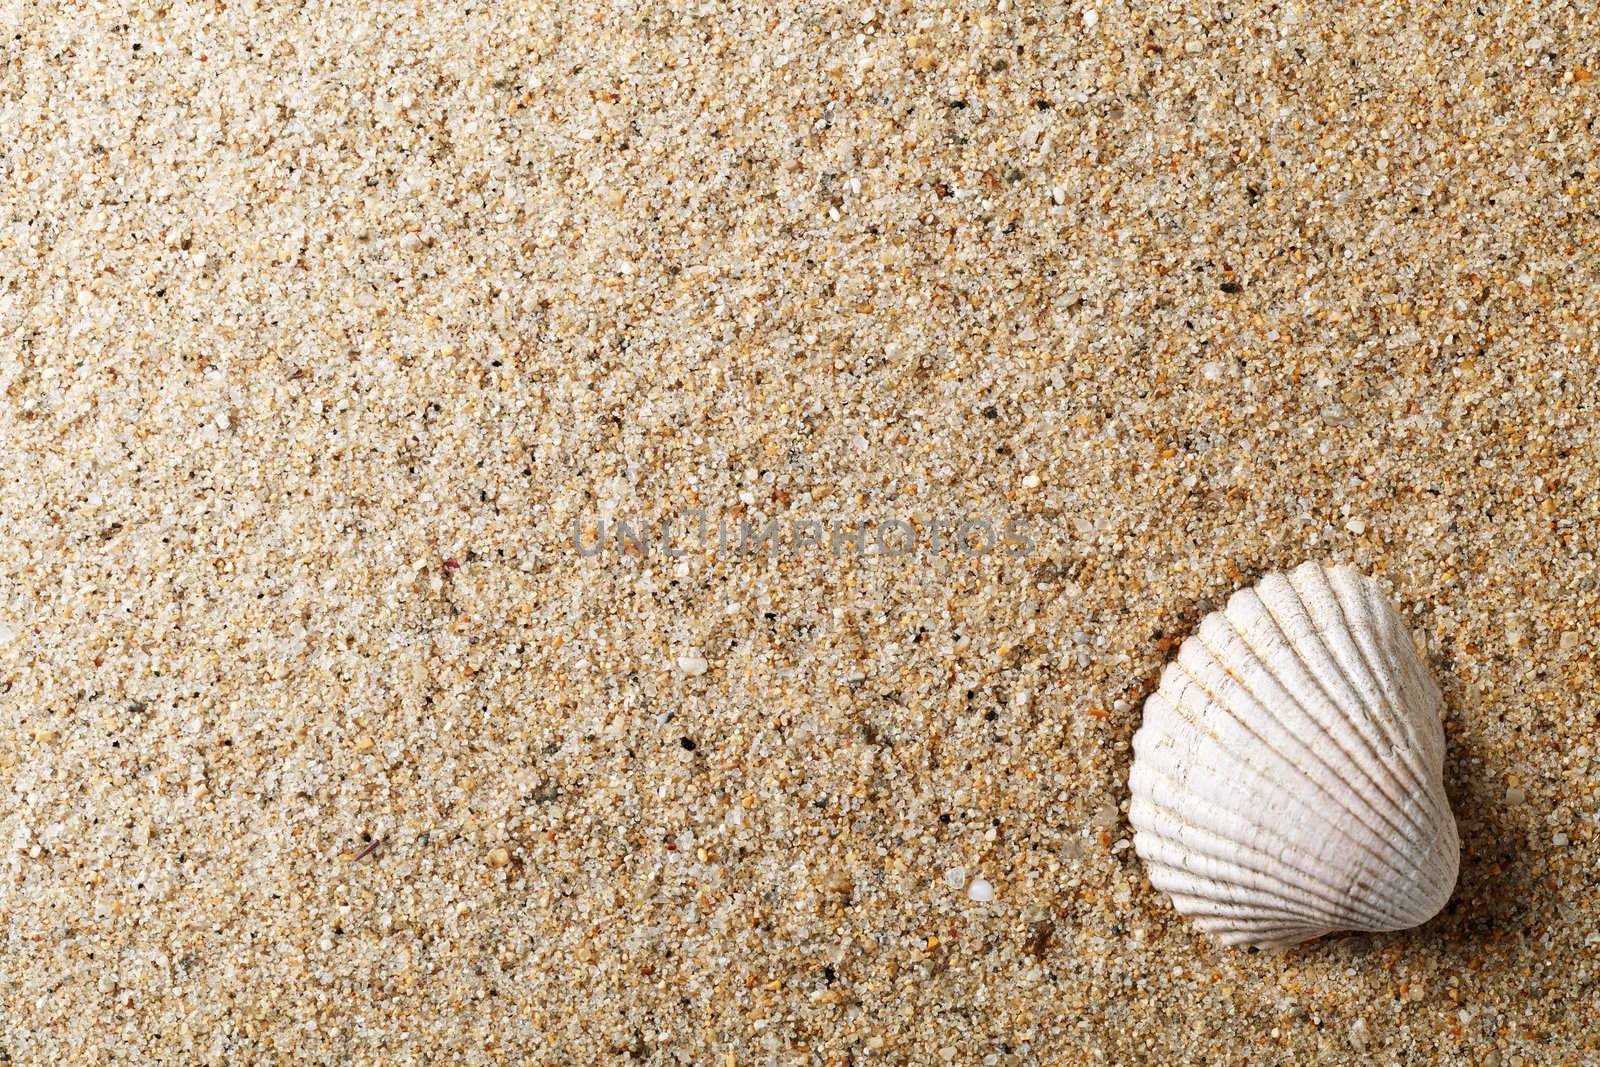 Sea shell on sand. Summer beach background with copy space. Top view. Macro shot